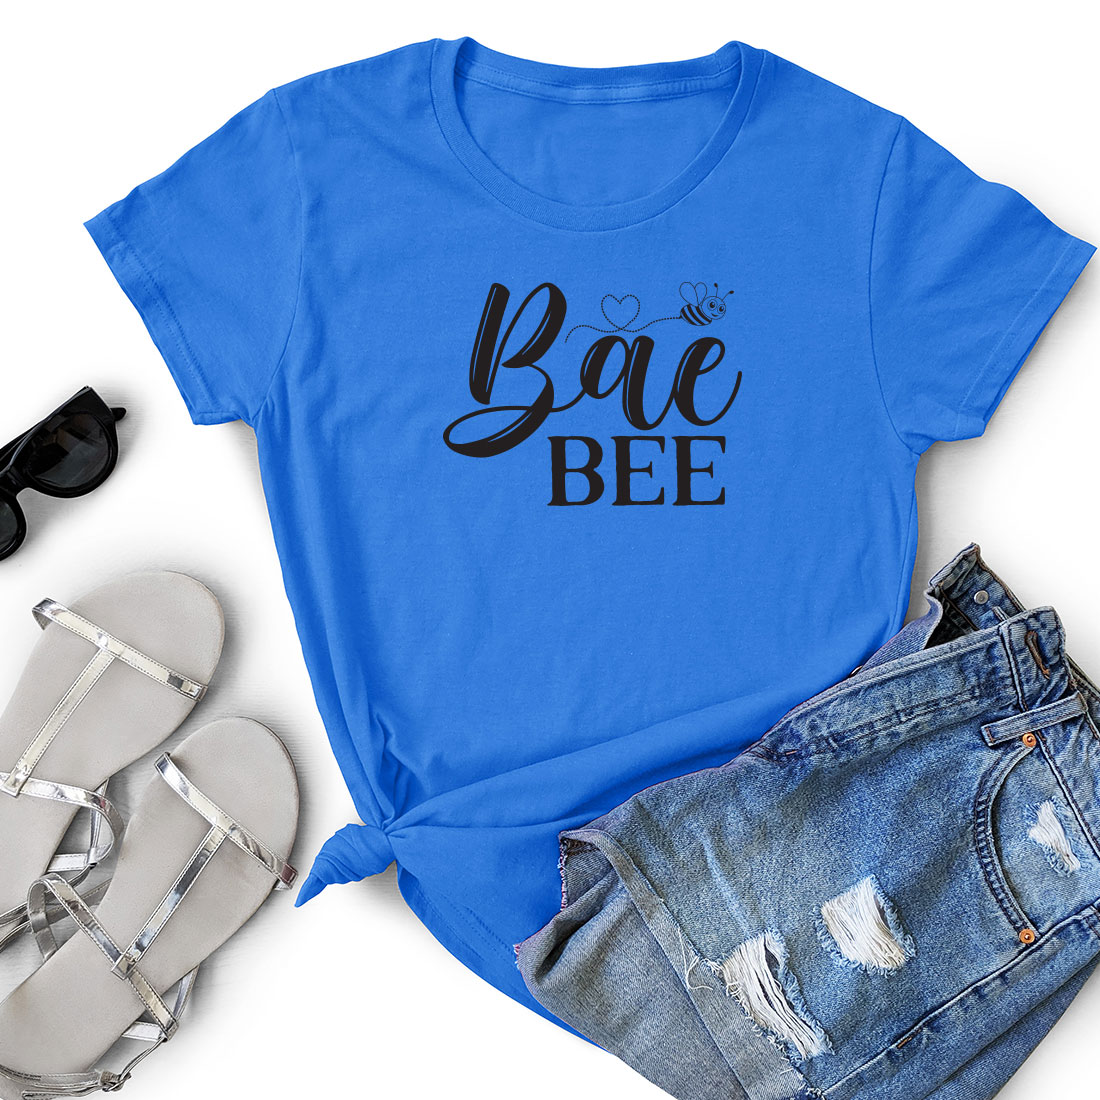 Blue shirt that says bae bee next to a pair of shorts.